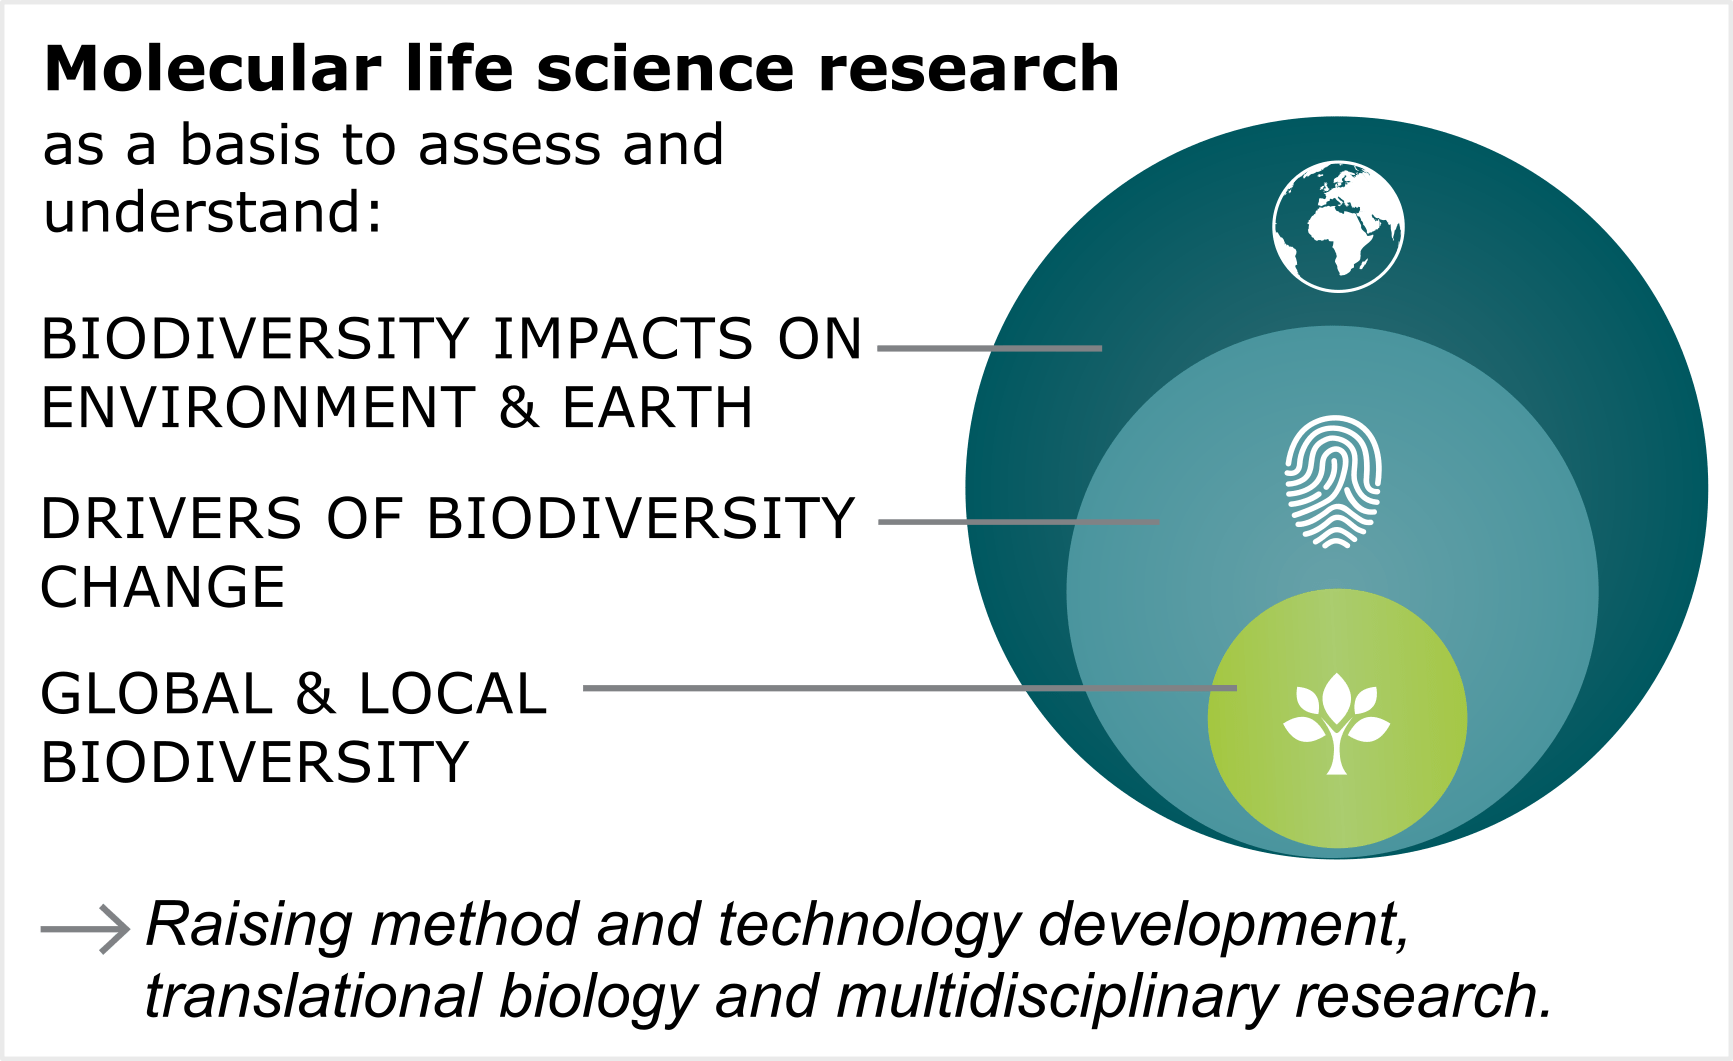 Research in molecular life sciences allows us to describe and understand the drivers and meaning of diversity: changes that are happening, the underlying mechanisms, and the impact of those changes on ecosystems and planetary health. 